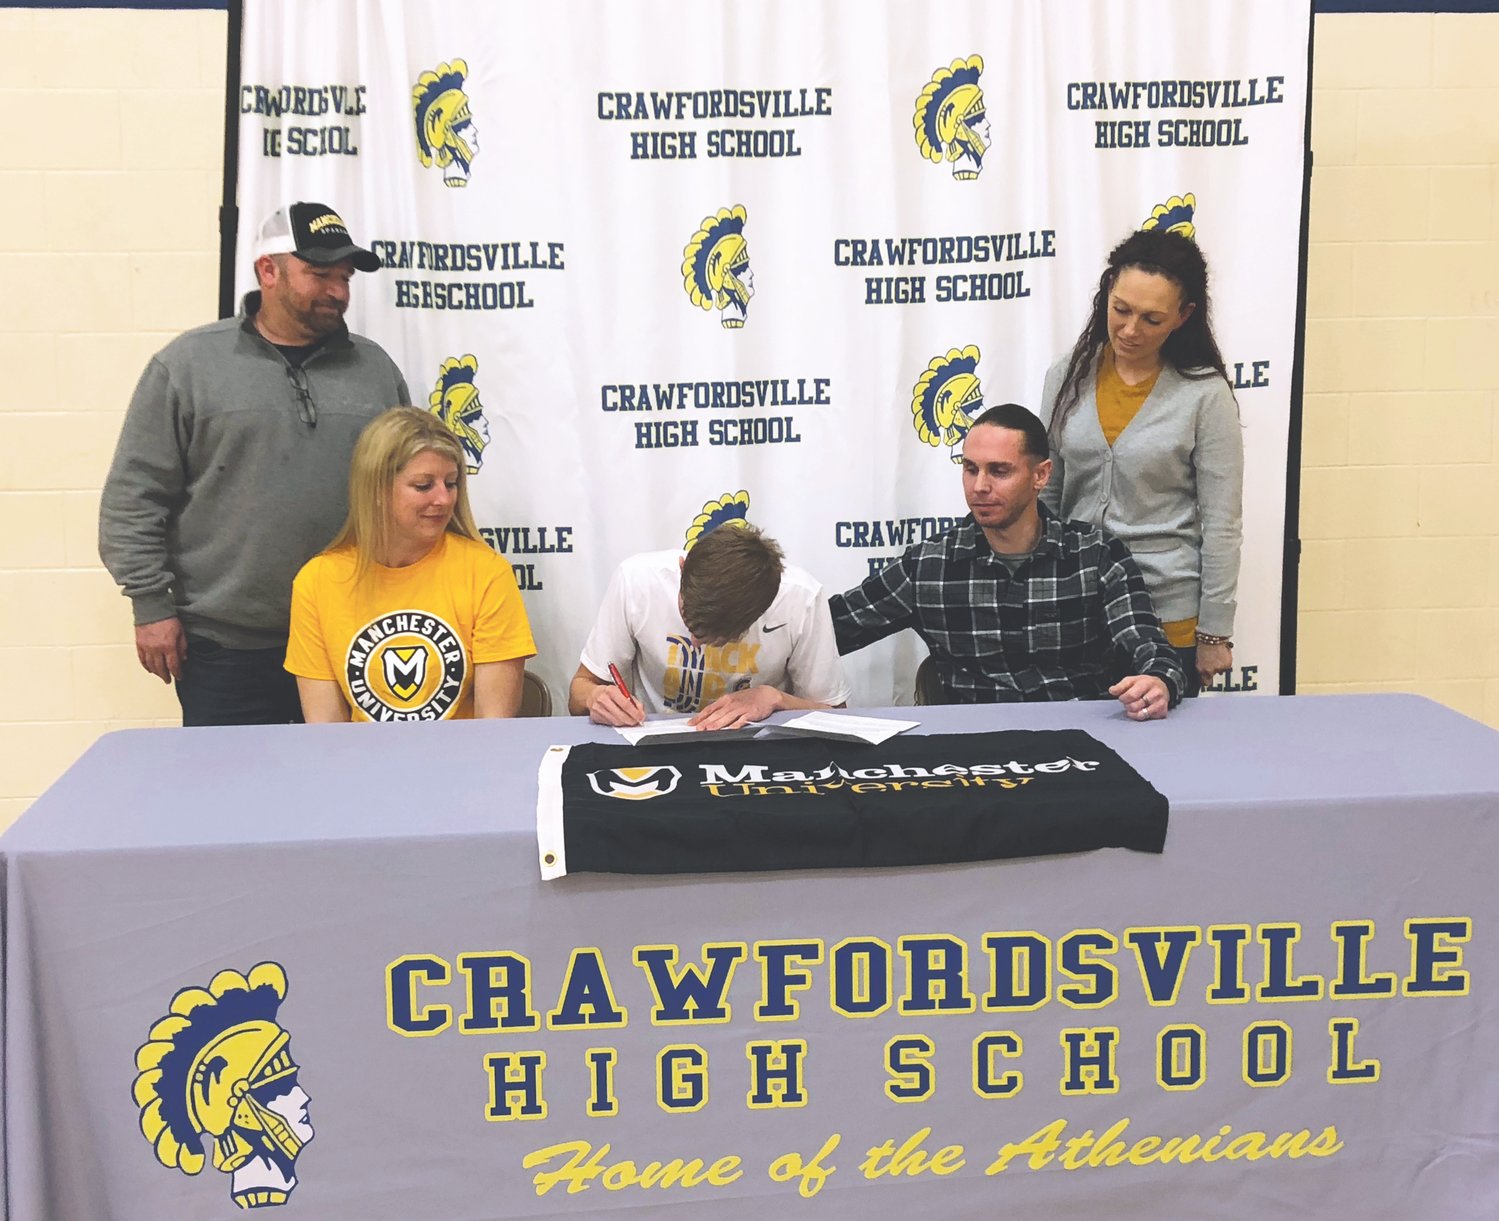 Crawfordsville senior Tristan Bronaugh has committed to continue his track and field career at Manchester University. PICTURED L-R: Tristan's Step-Dad, Mike Inskeep, Mom, Kathleen Inskeep, Tristan, Dad, Jason Bronaugh, and Step-Mom Jennifer Bronaugh